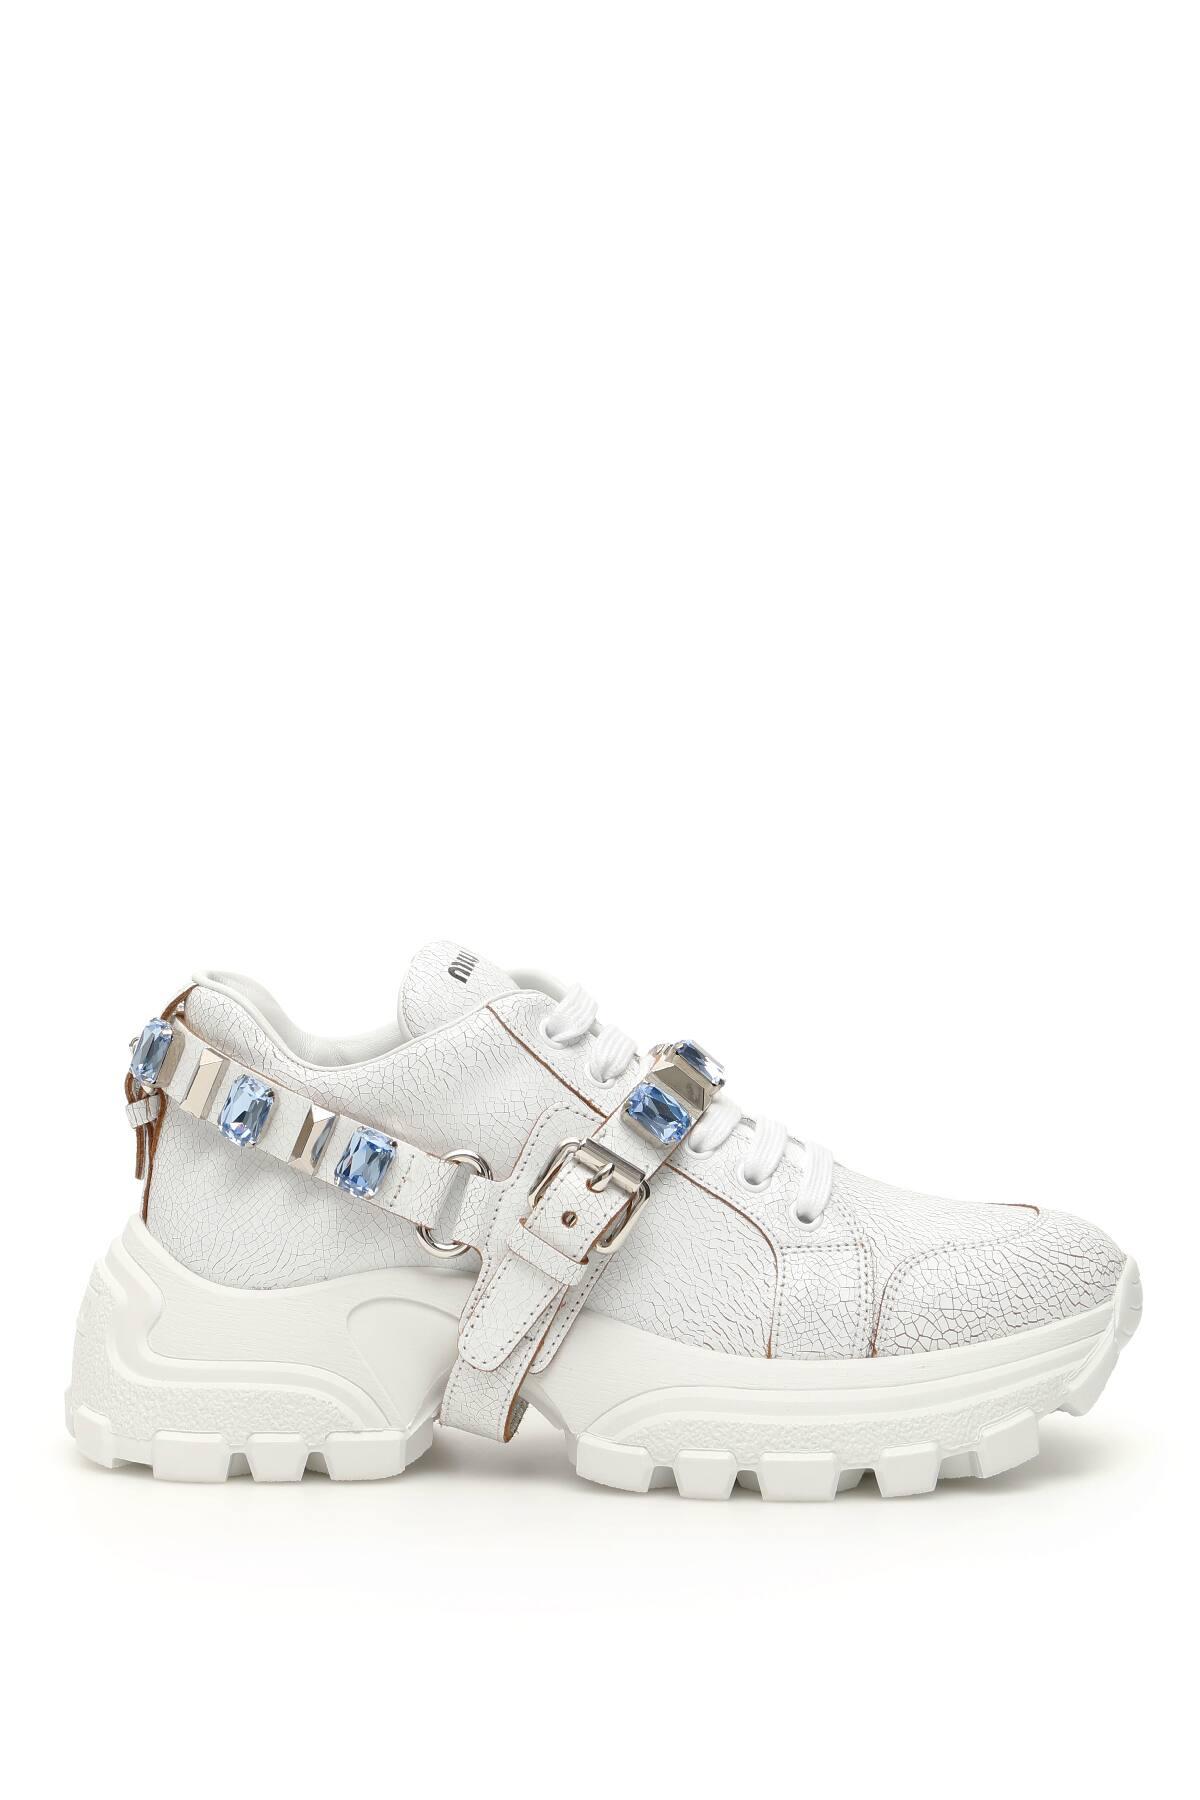 Miu Miu Leather Crackled Combat Sneakers in White,Light Blue (White) - Lyst